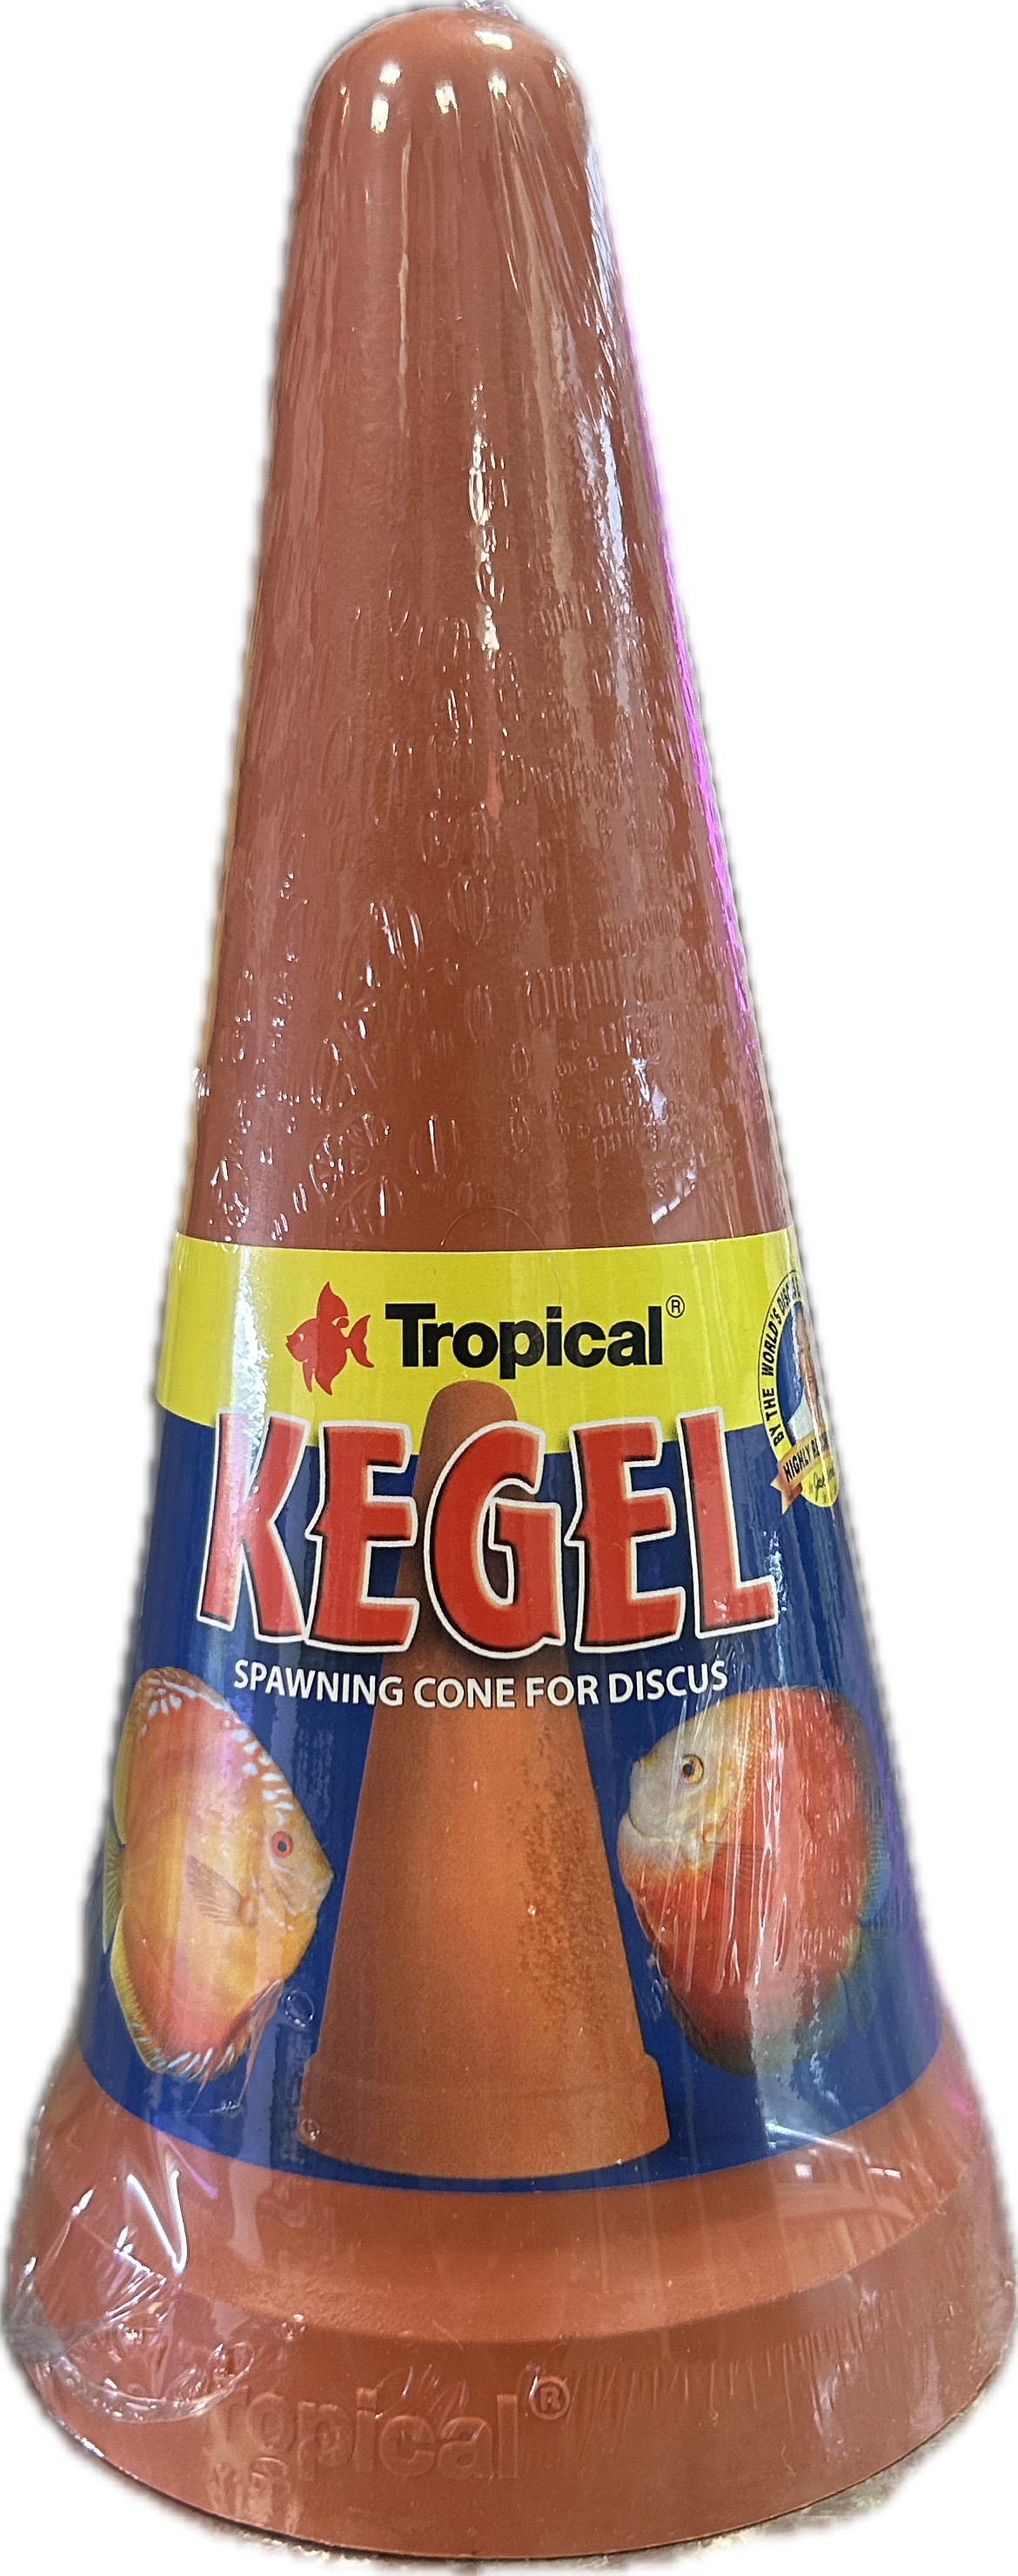 Tropical Kegel Spawning Cone for Discus